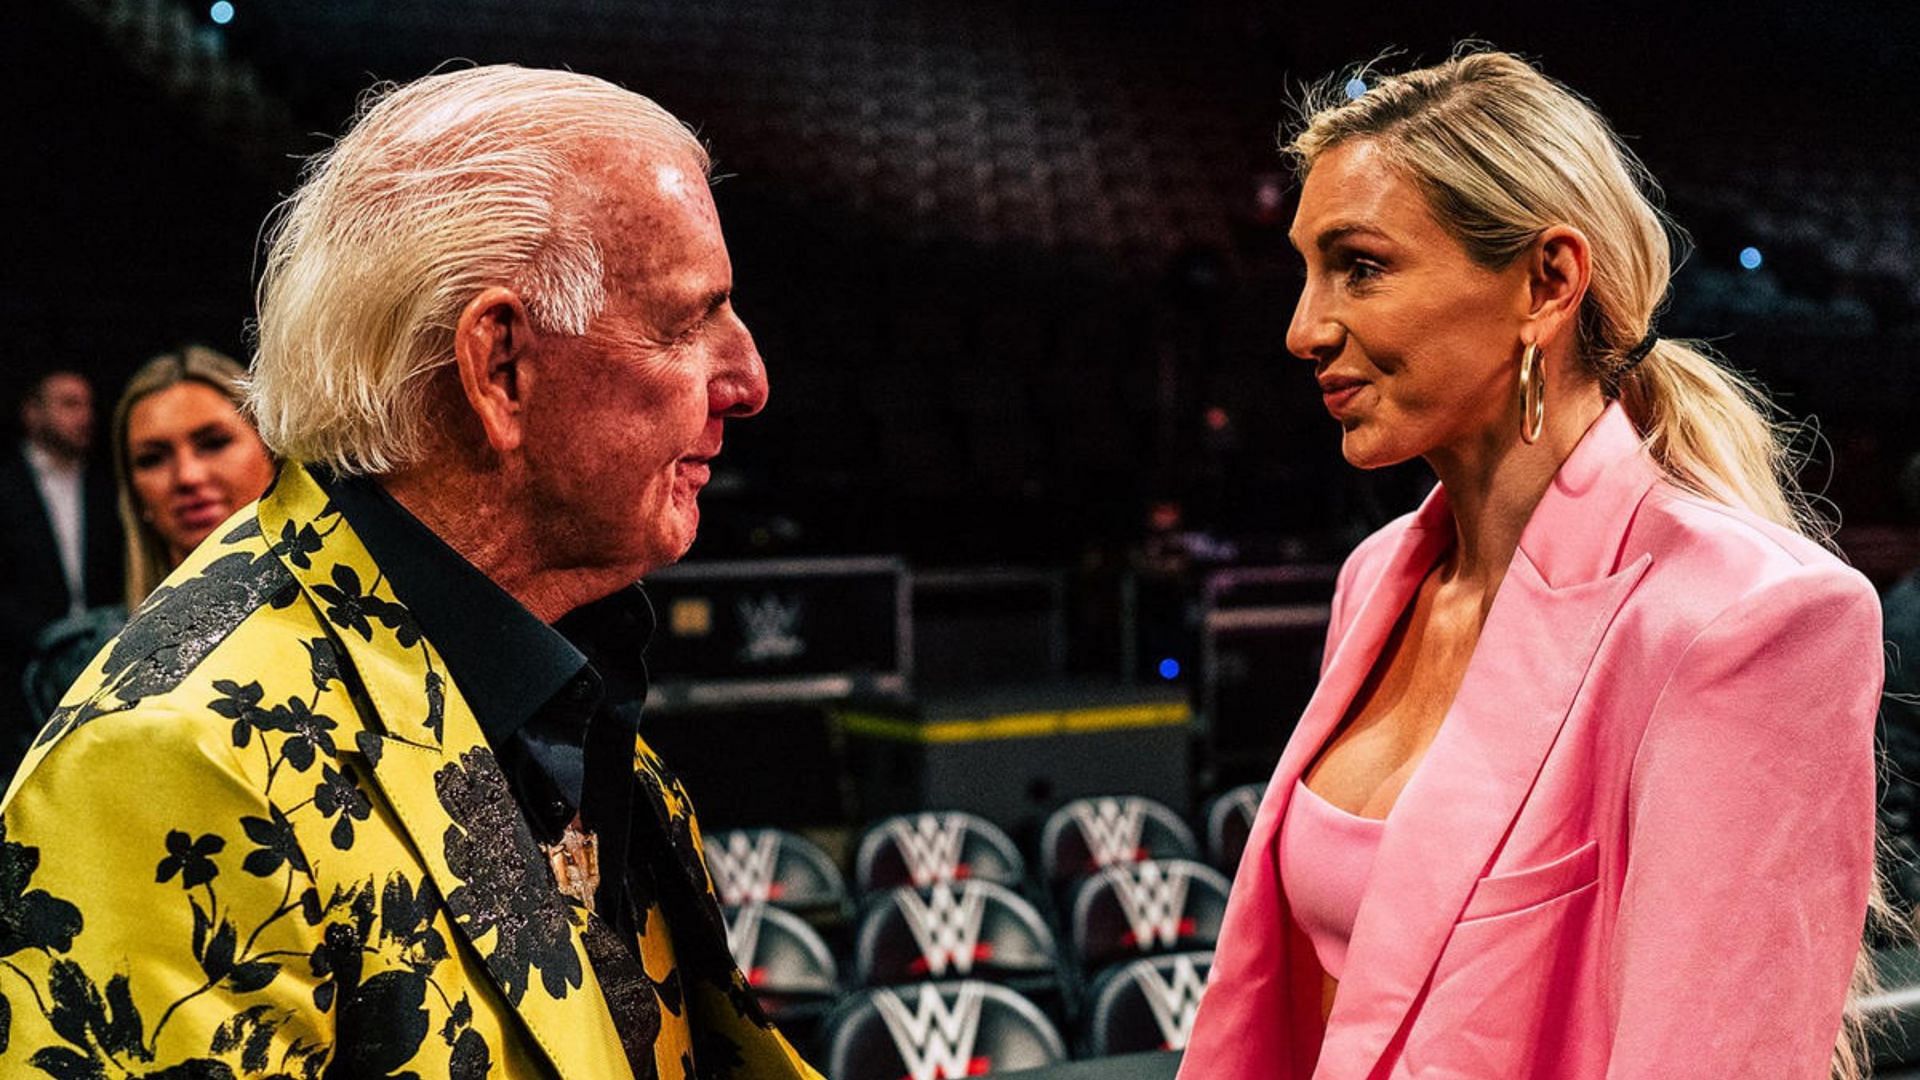 WWE Hall of Famer Ric Flair (left) and SmackDown Women